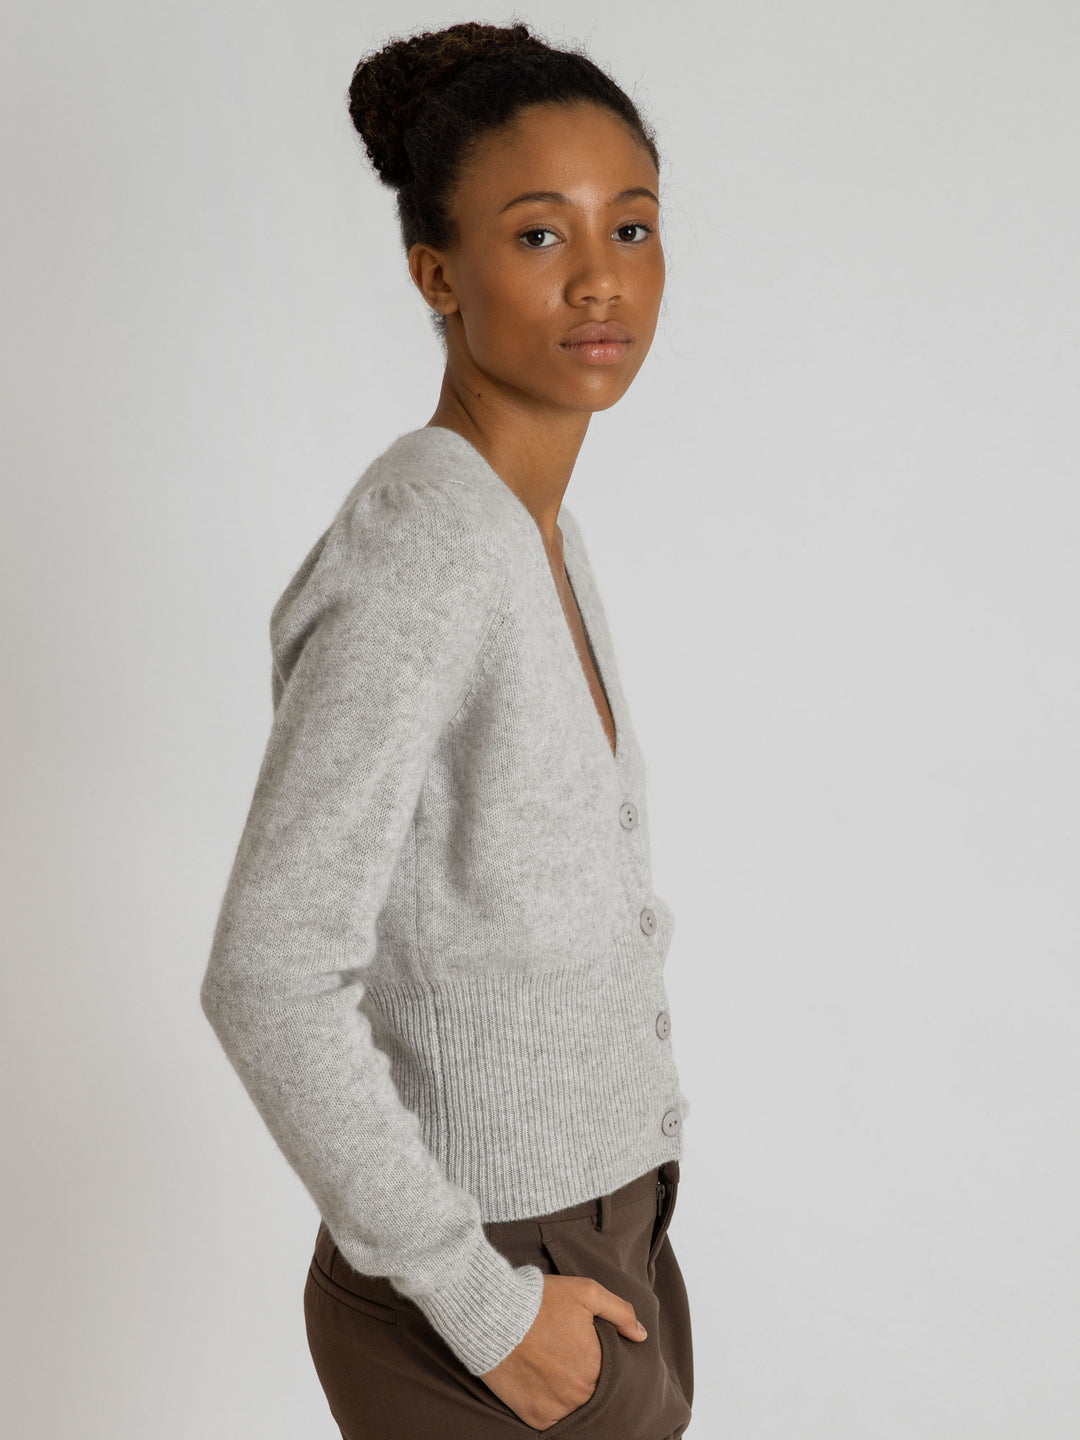 Cashmere cardigan puff sleeves, long sleeves, 100% pure cashmere, Scandinavian design, color: light grey